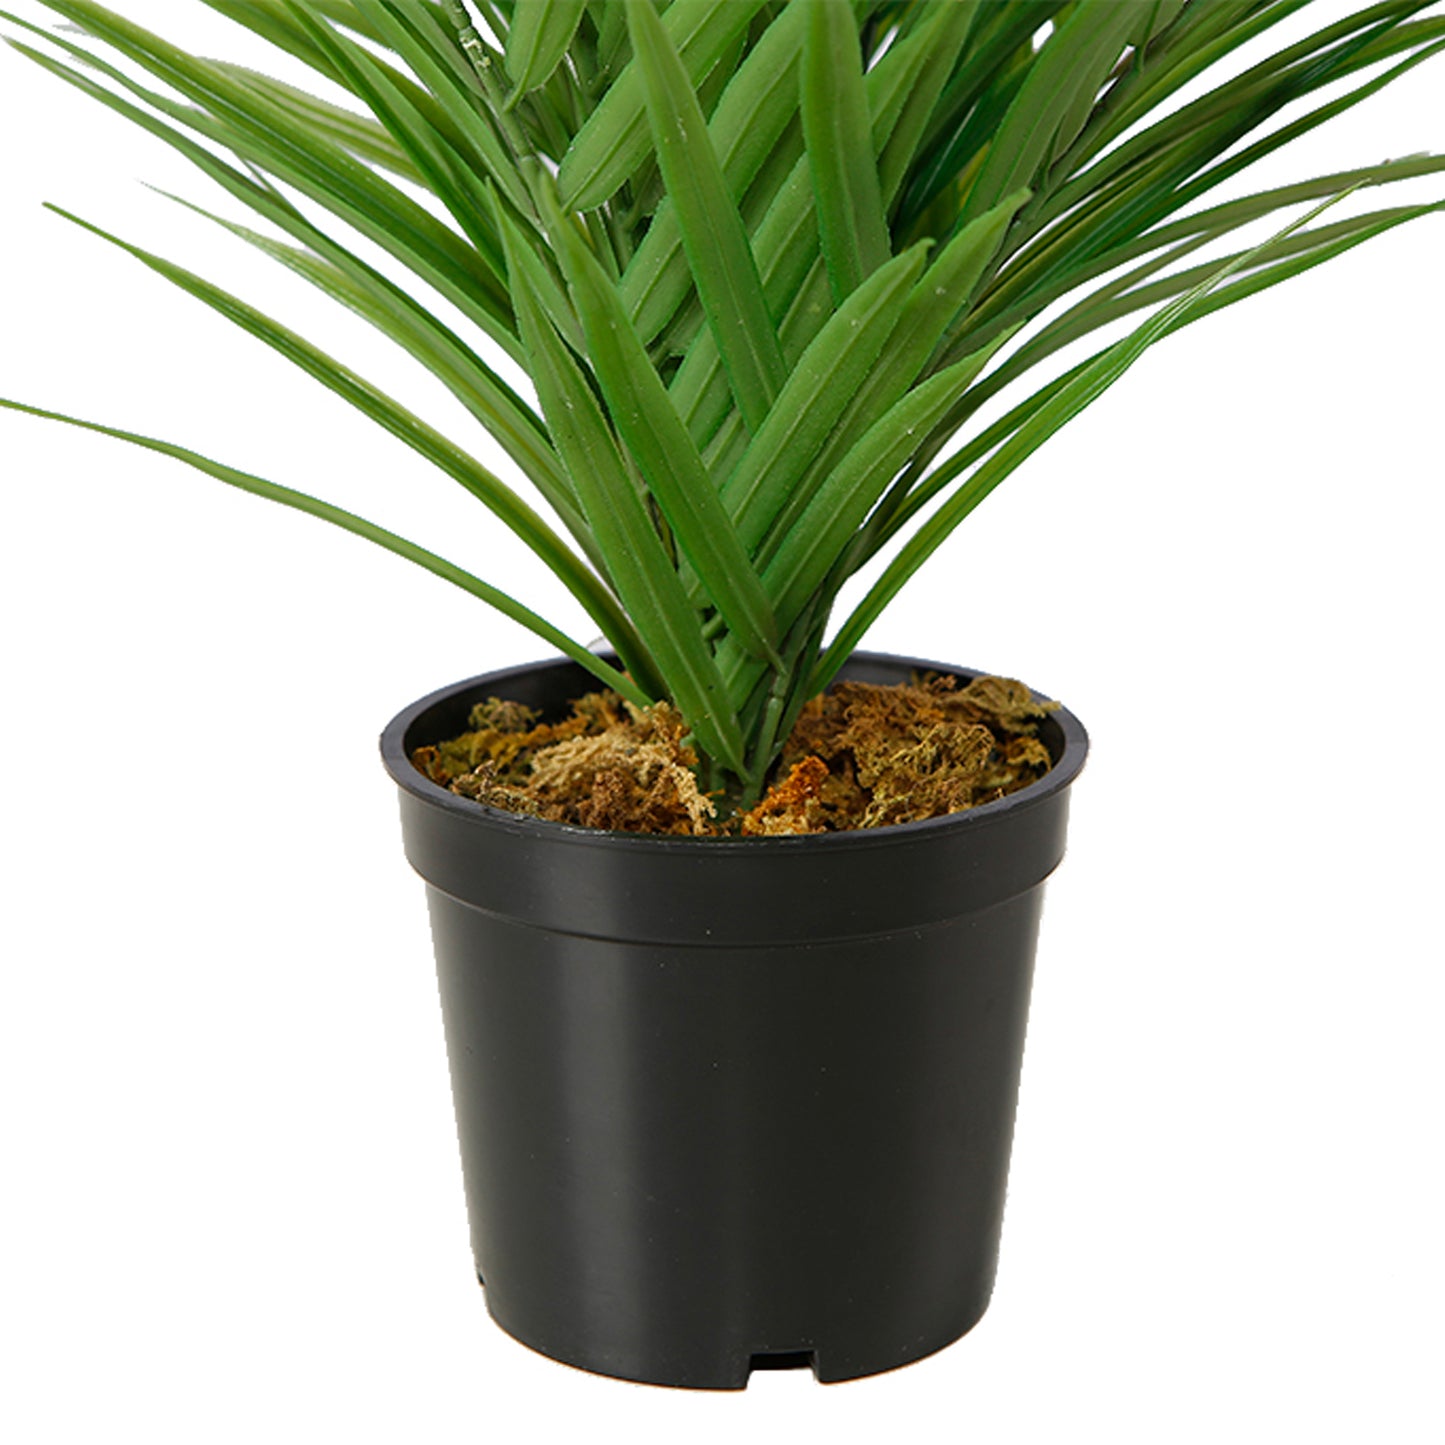 16.5" Potted Fake Palm Tree